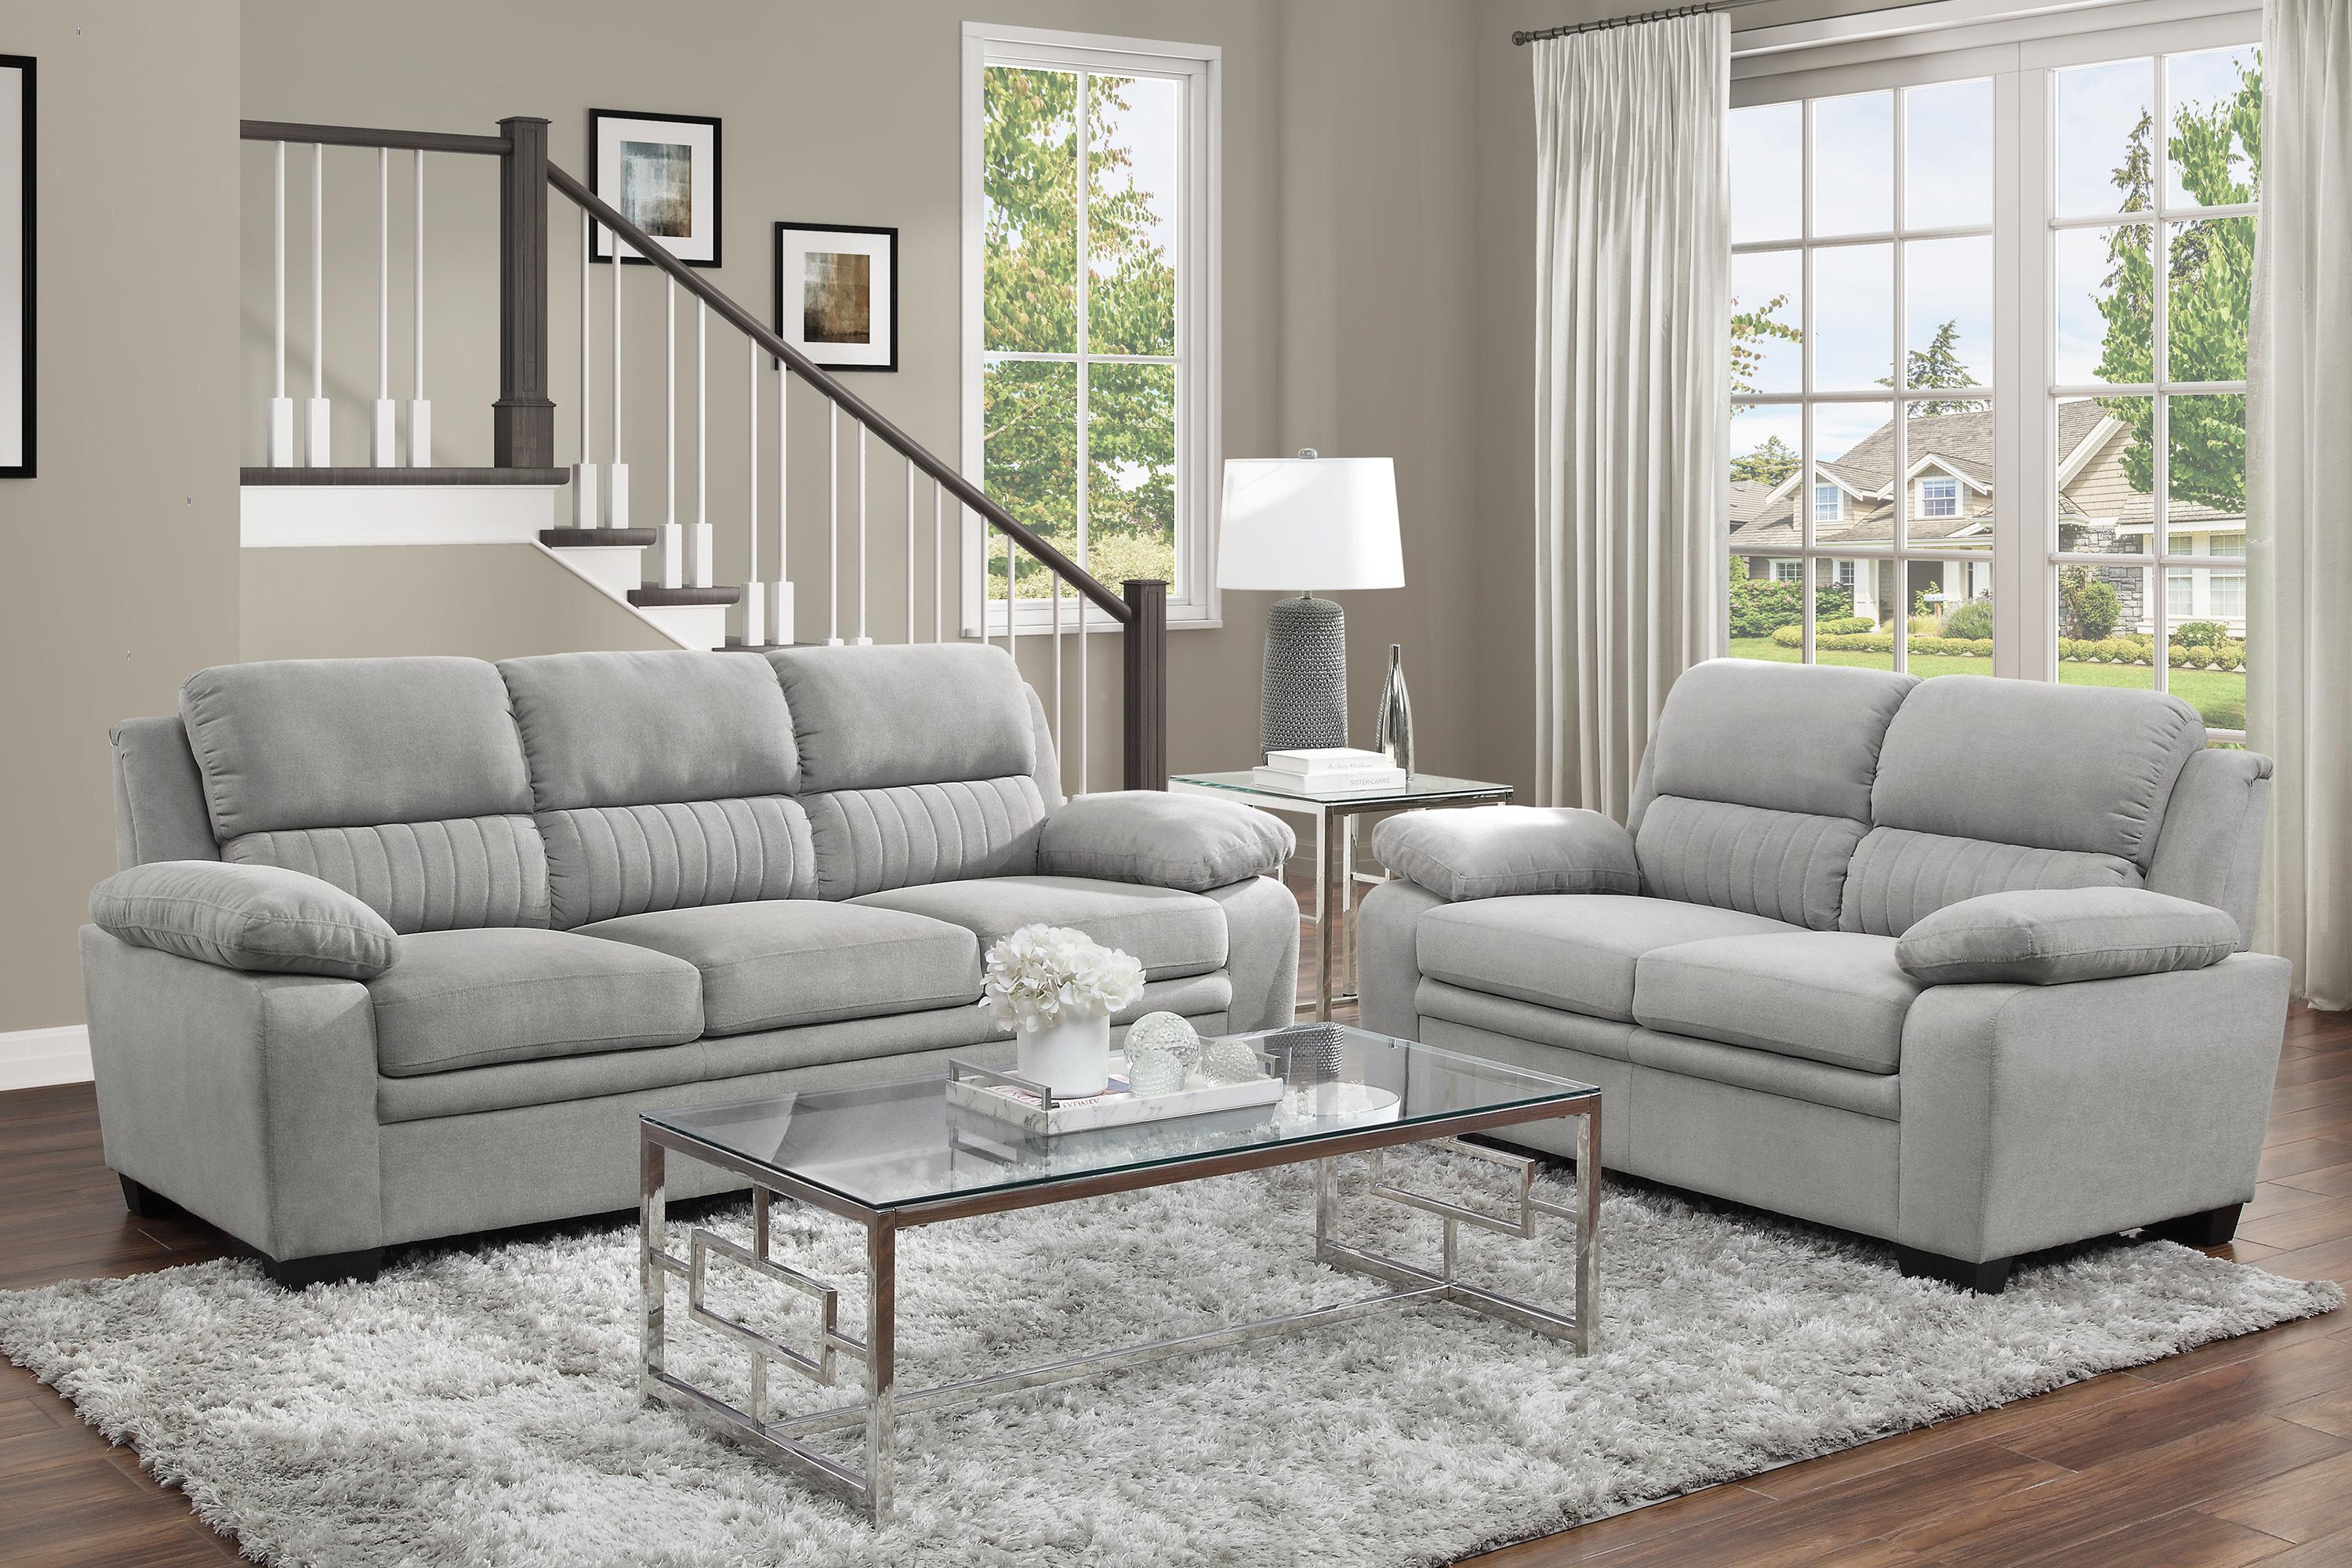 Modern Living Room Set 9333GY-2PC Holleman 9333GY-2PC in Gray 